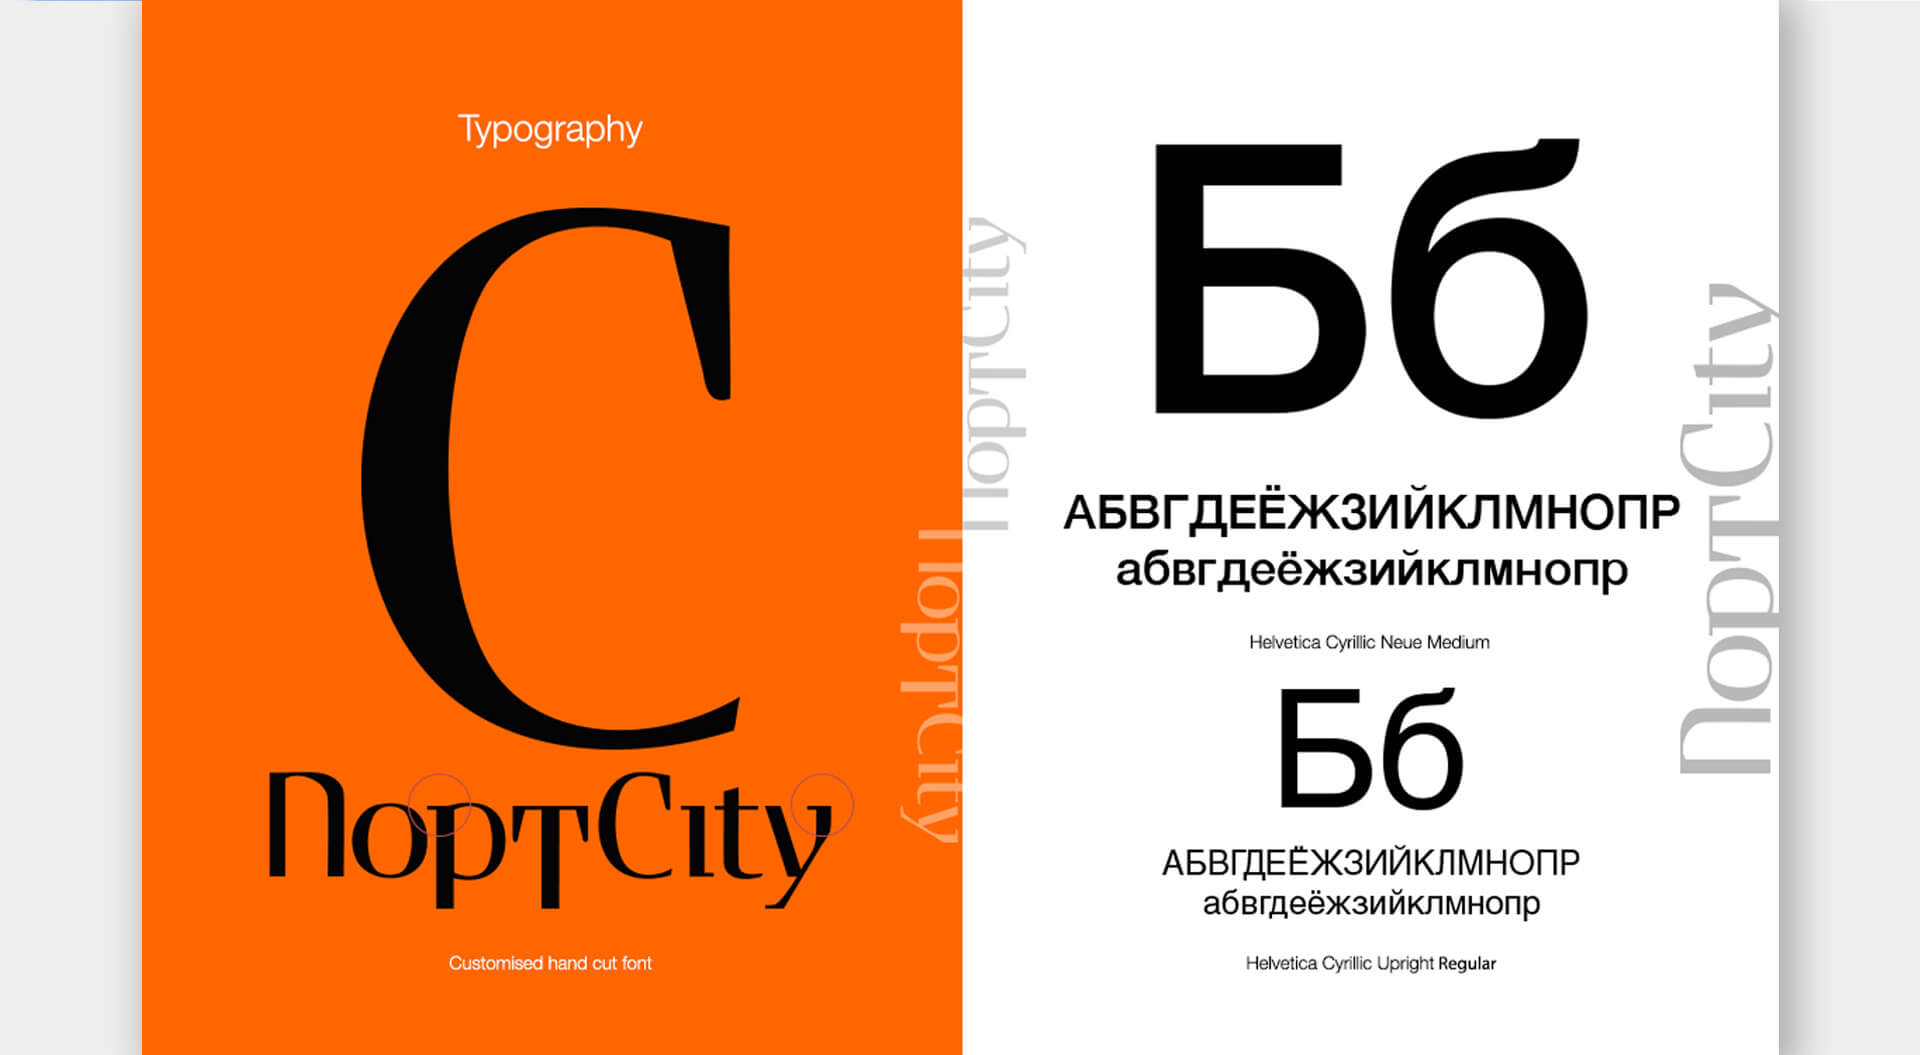 Port City Shopping Mall brand manual typography